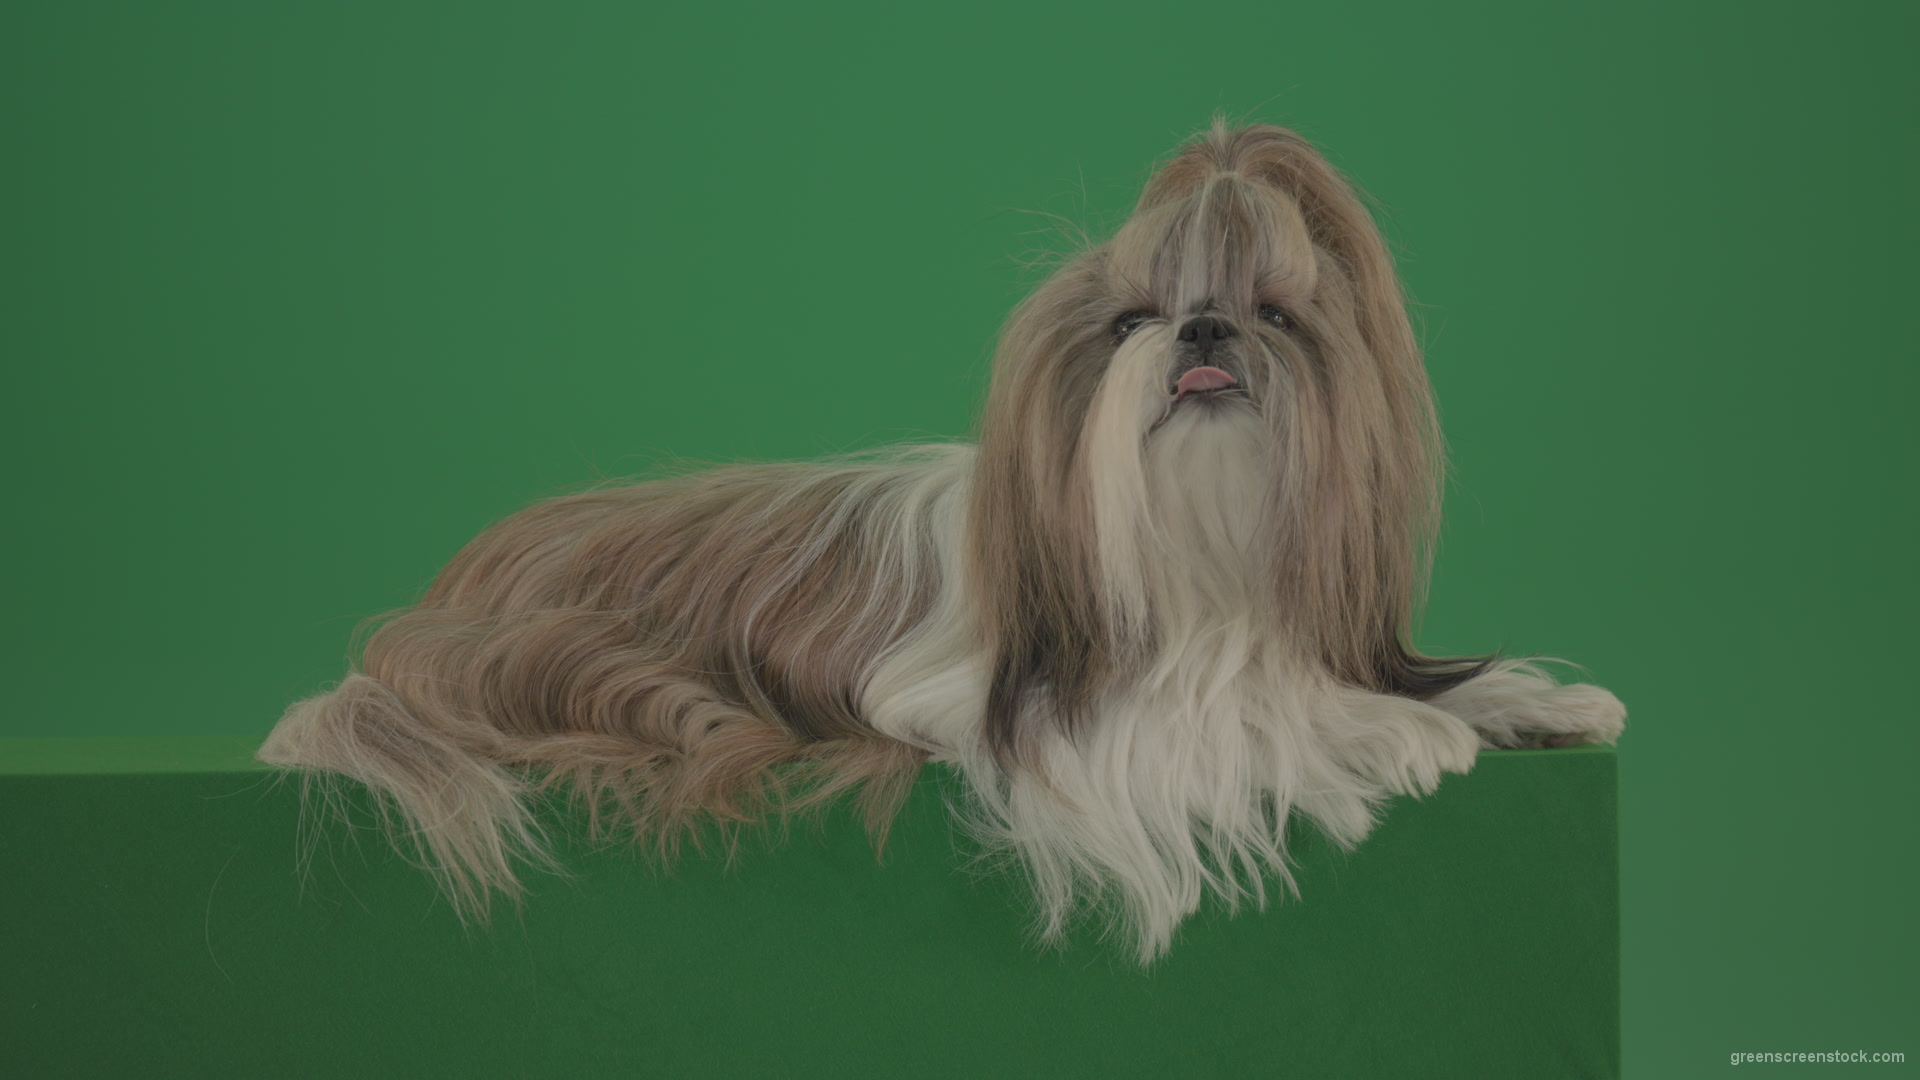 Fashion-luxury-toy-dog-Shihtzu-chilling-on-green-screen-isolated-background-4K_008 Green Screen Stock